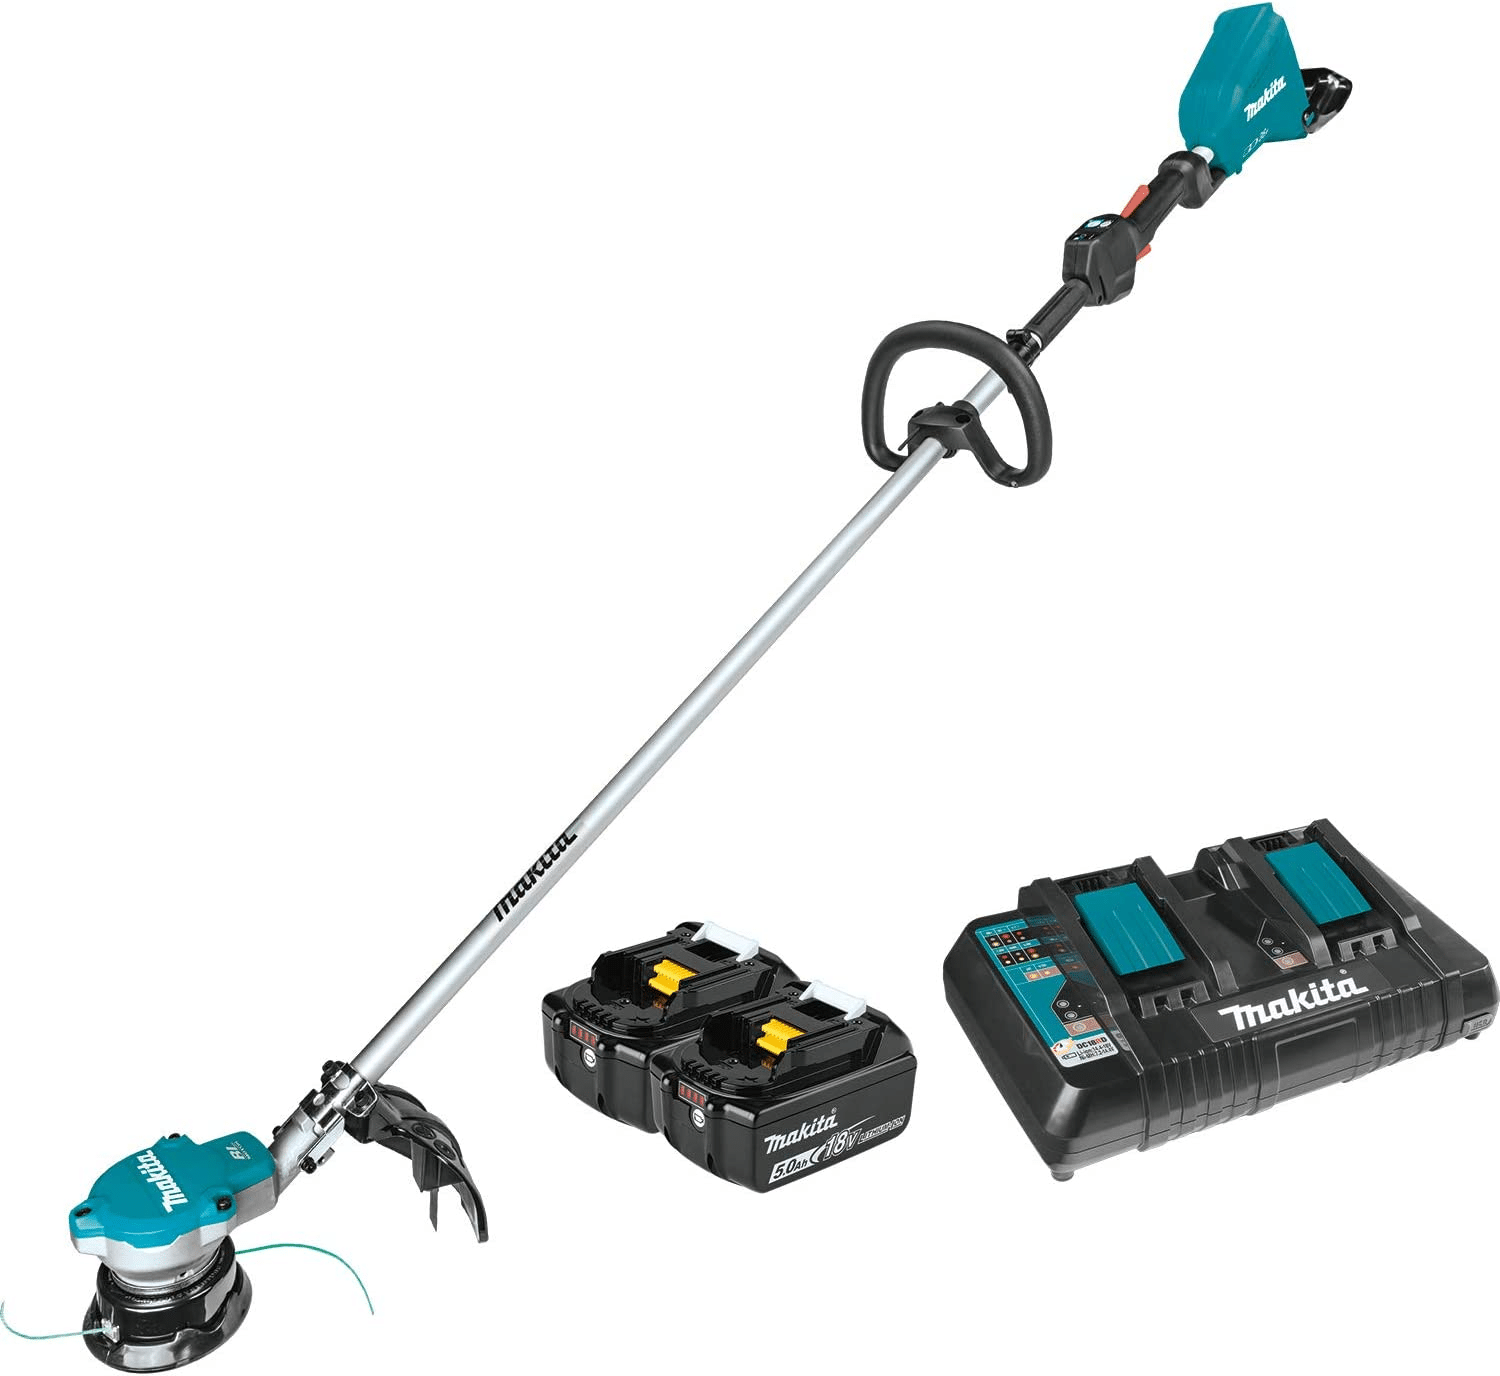 Makita lithium ion battery power string trimmer